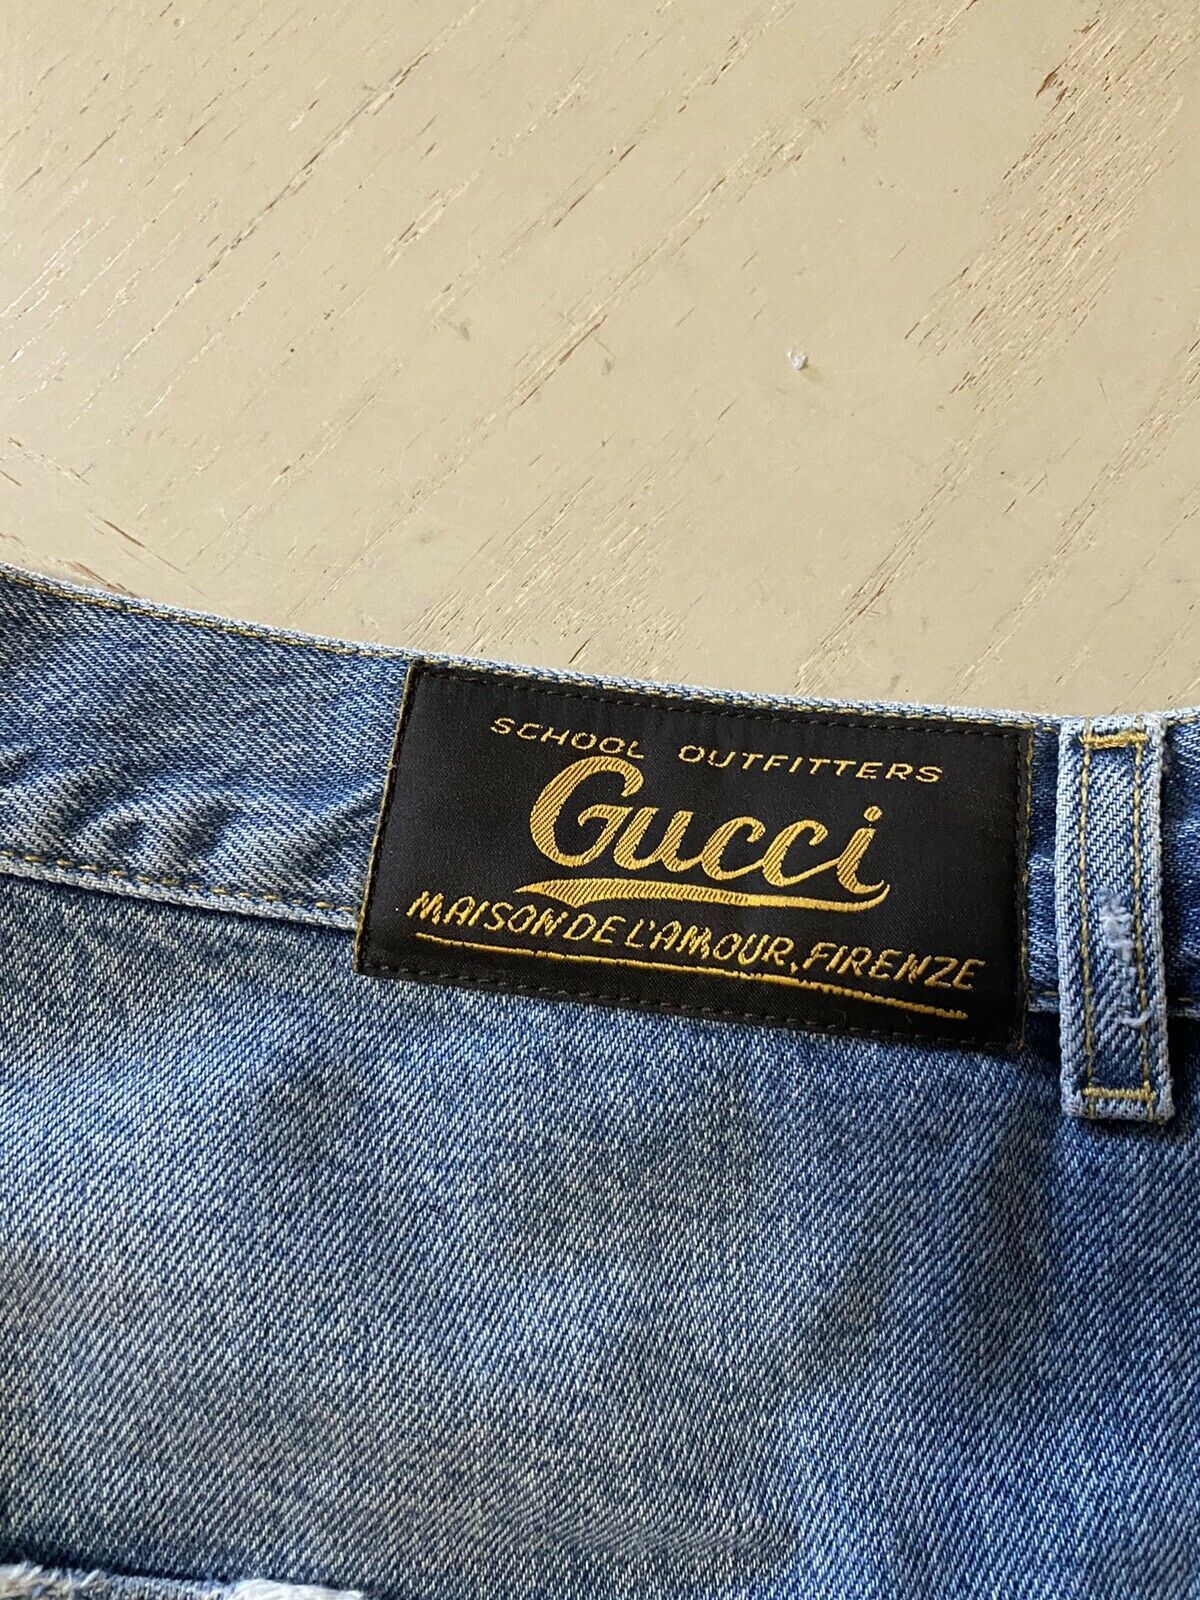 NWT $1500 Gucci Mens Short Jeans Pants Blue Size 36 taly